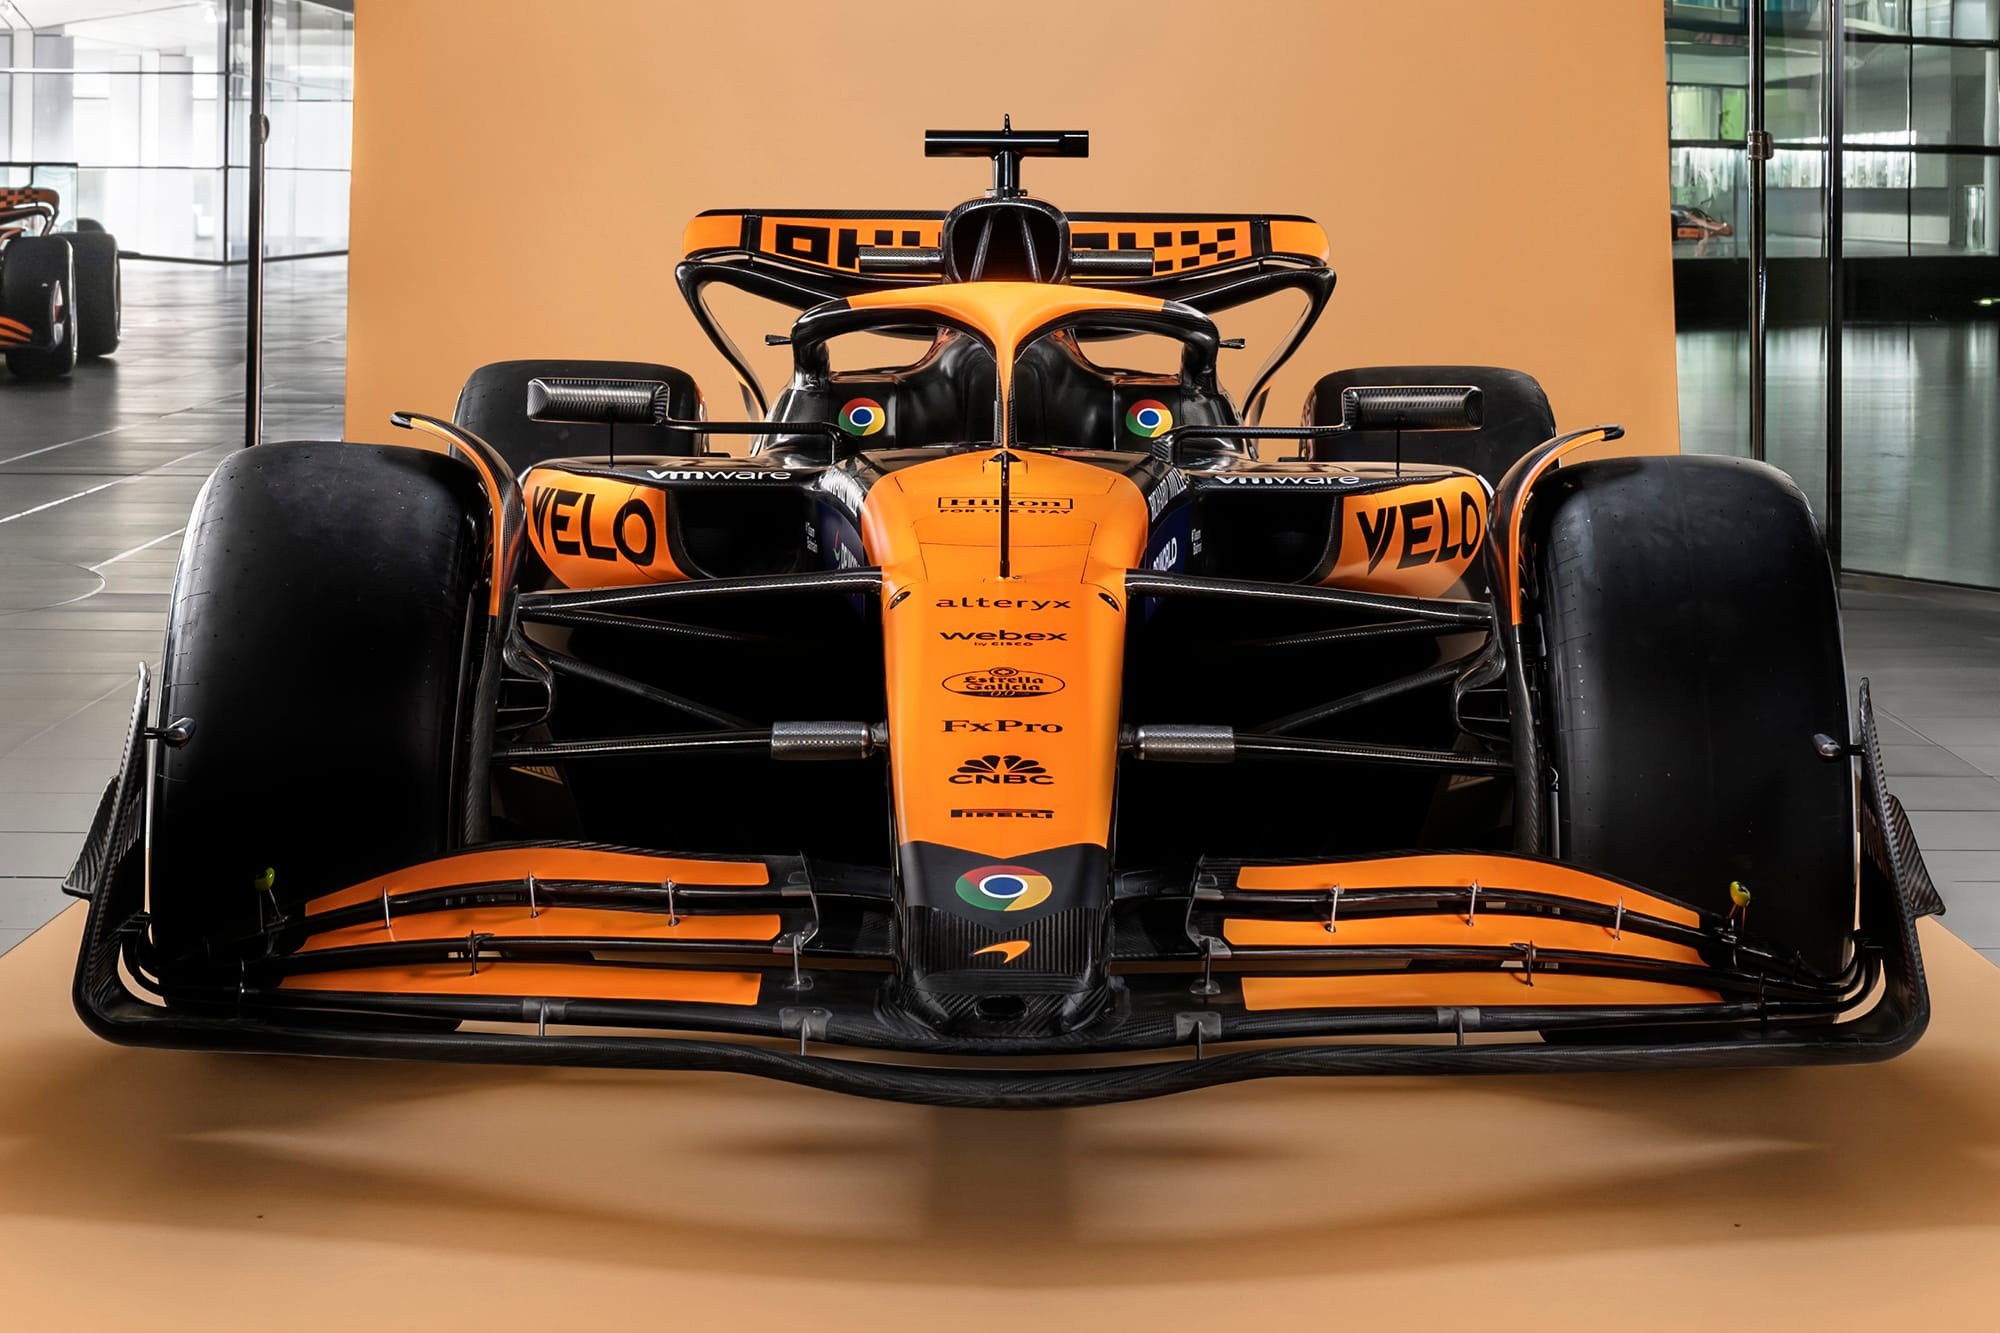 2024 McLaren MCL38 car reveal gallery: Check out more angles of